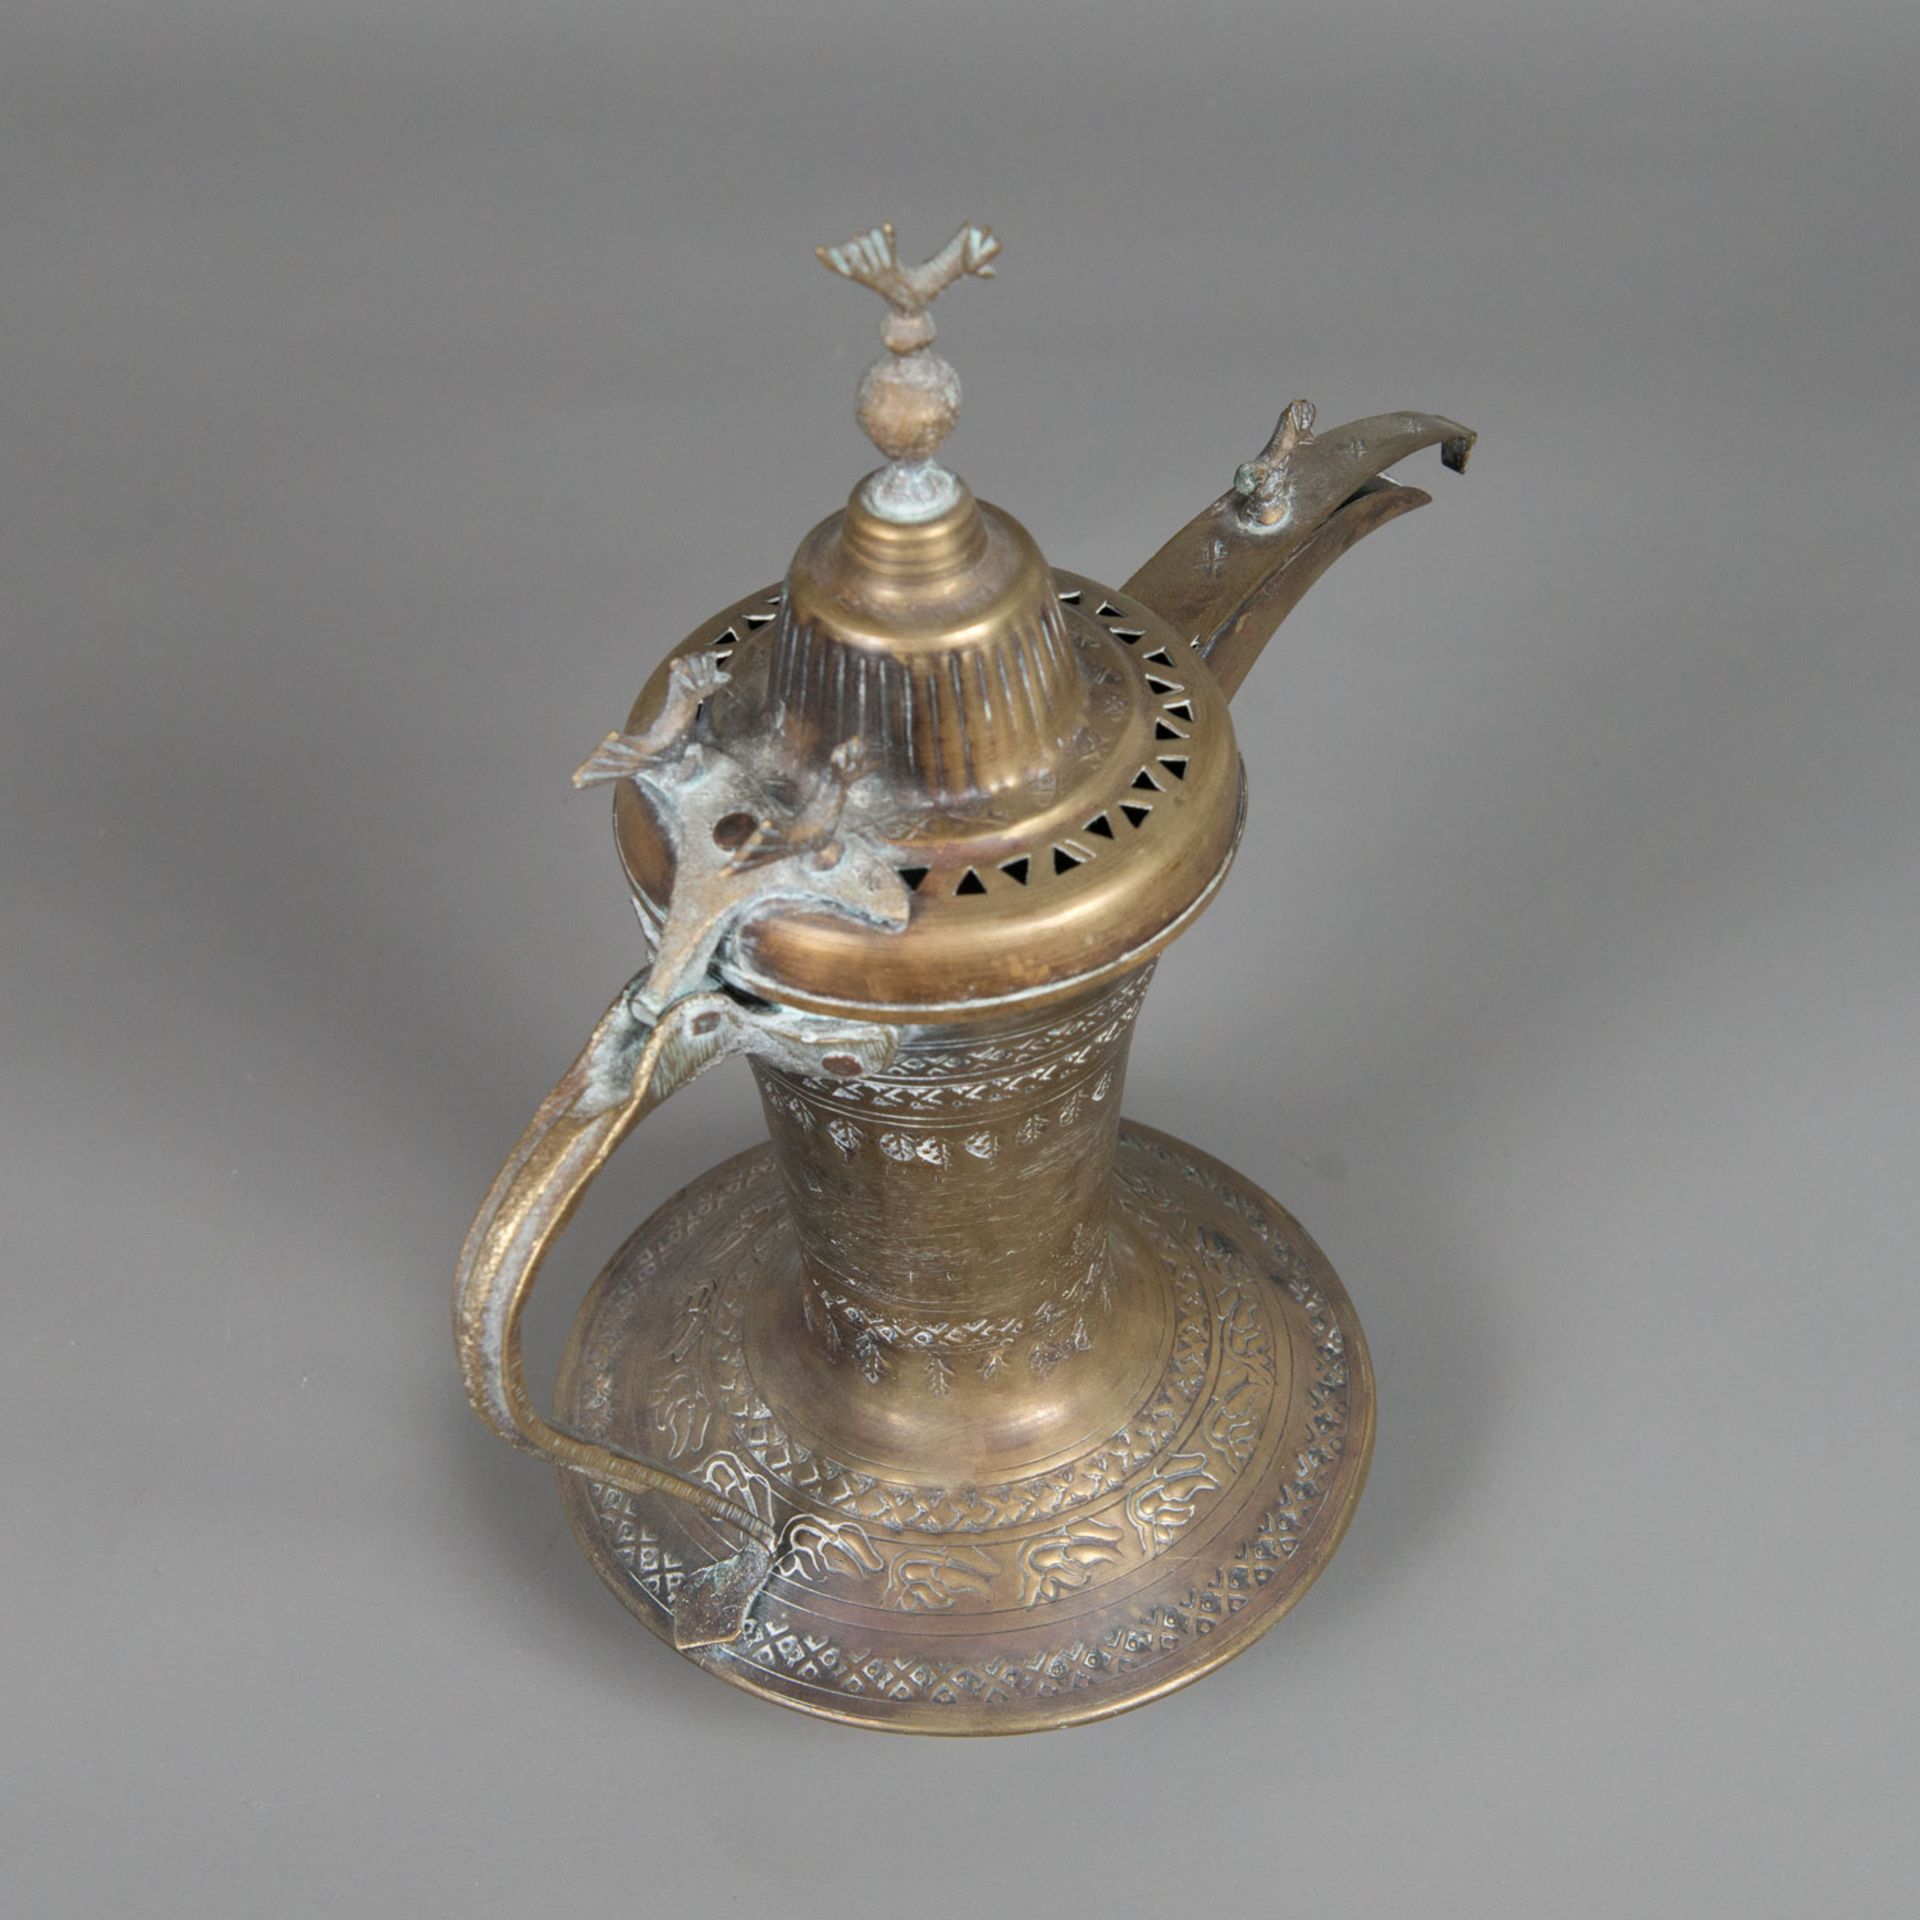 Syrian Coffee Pot - Image 3 of 3